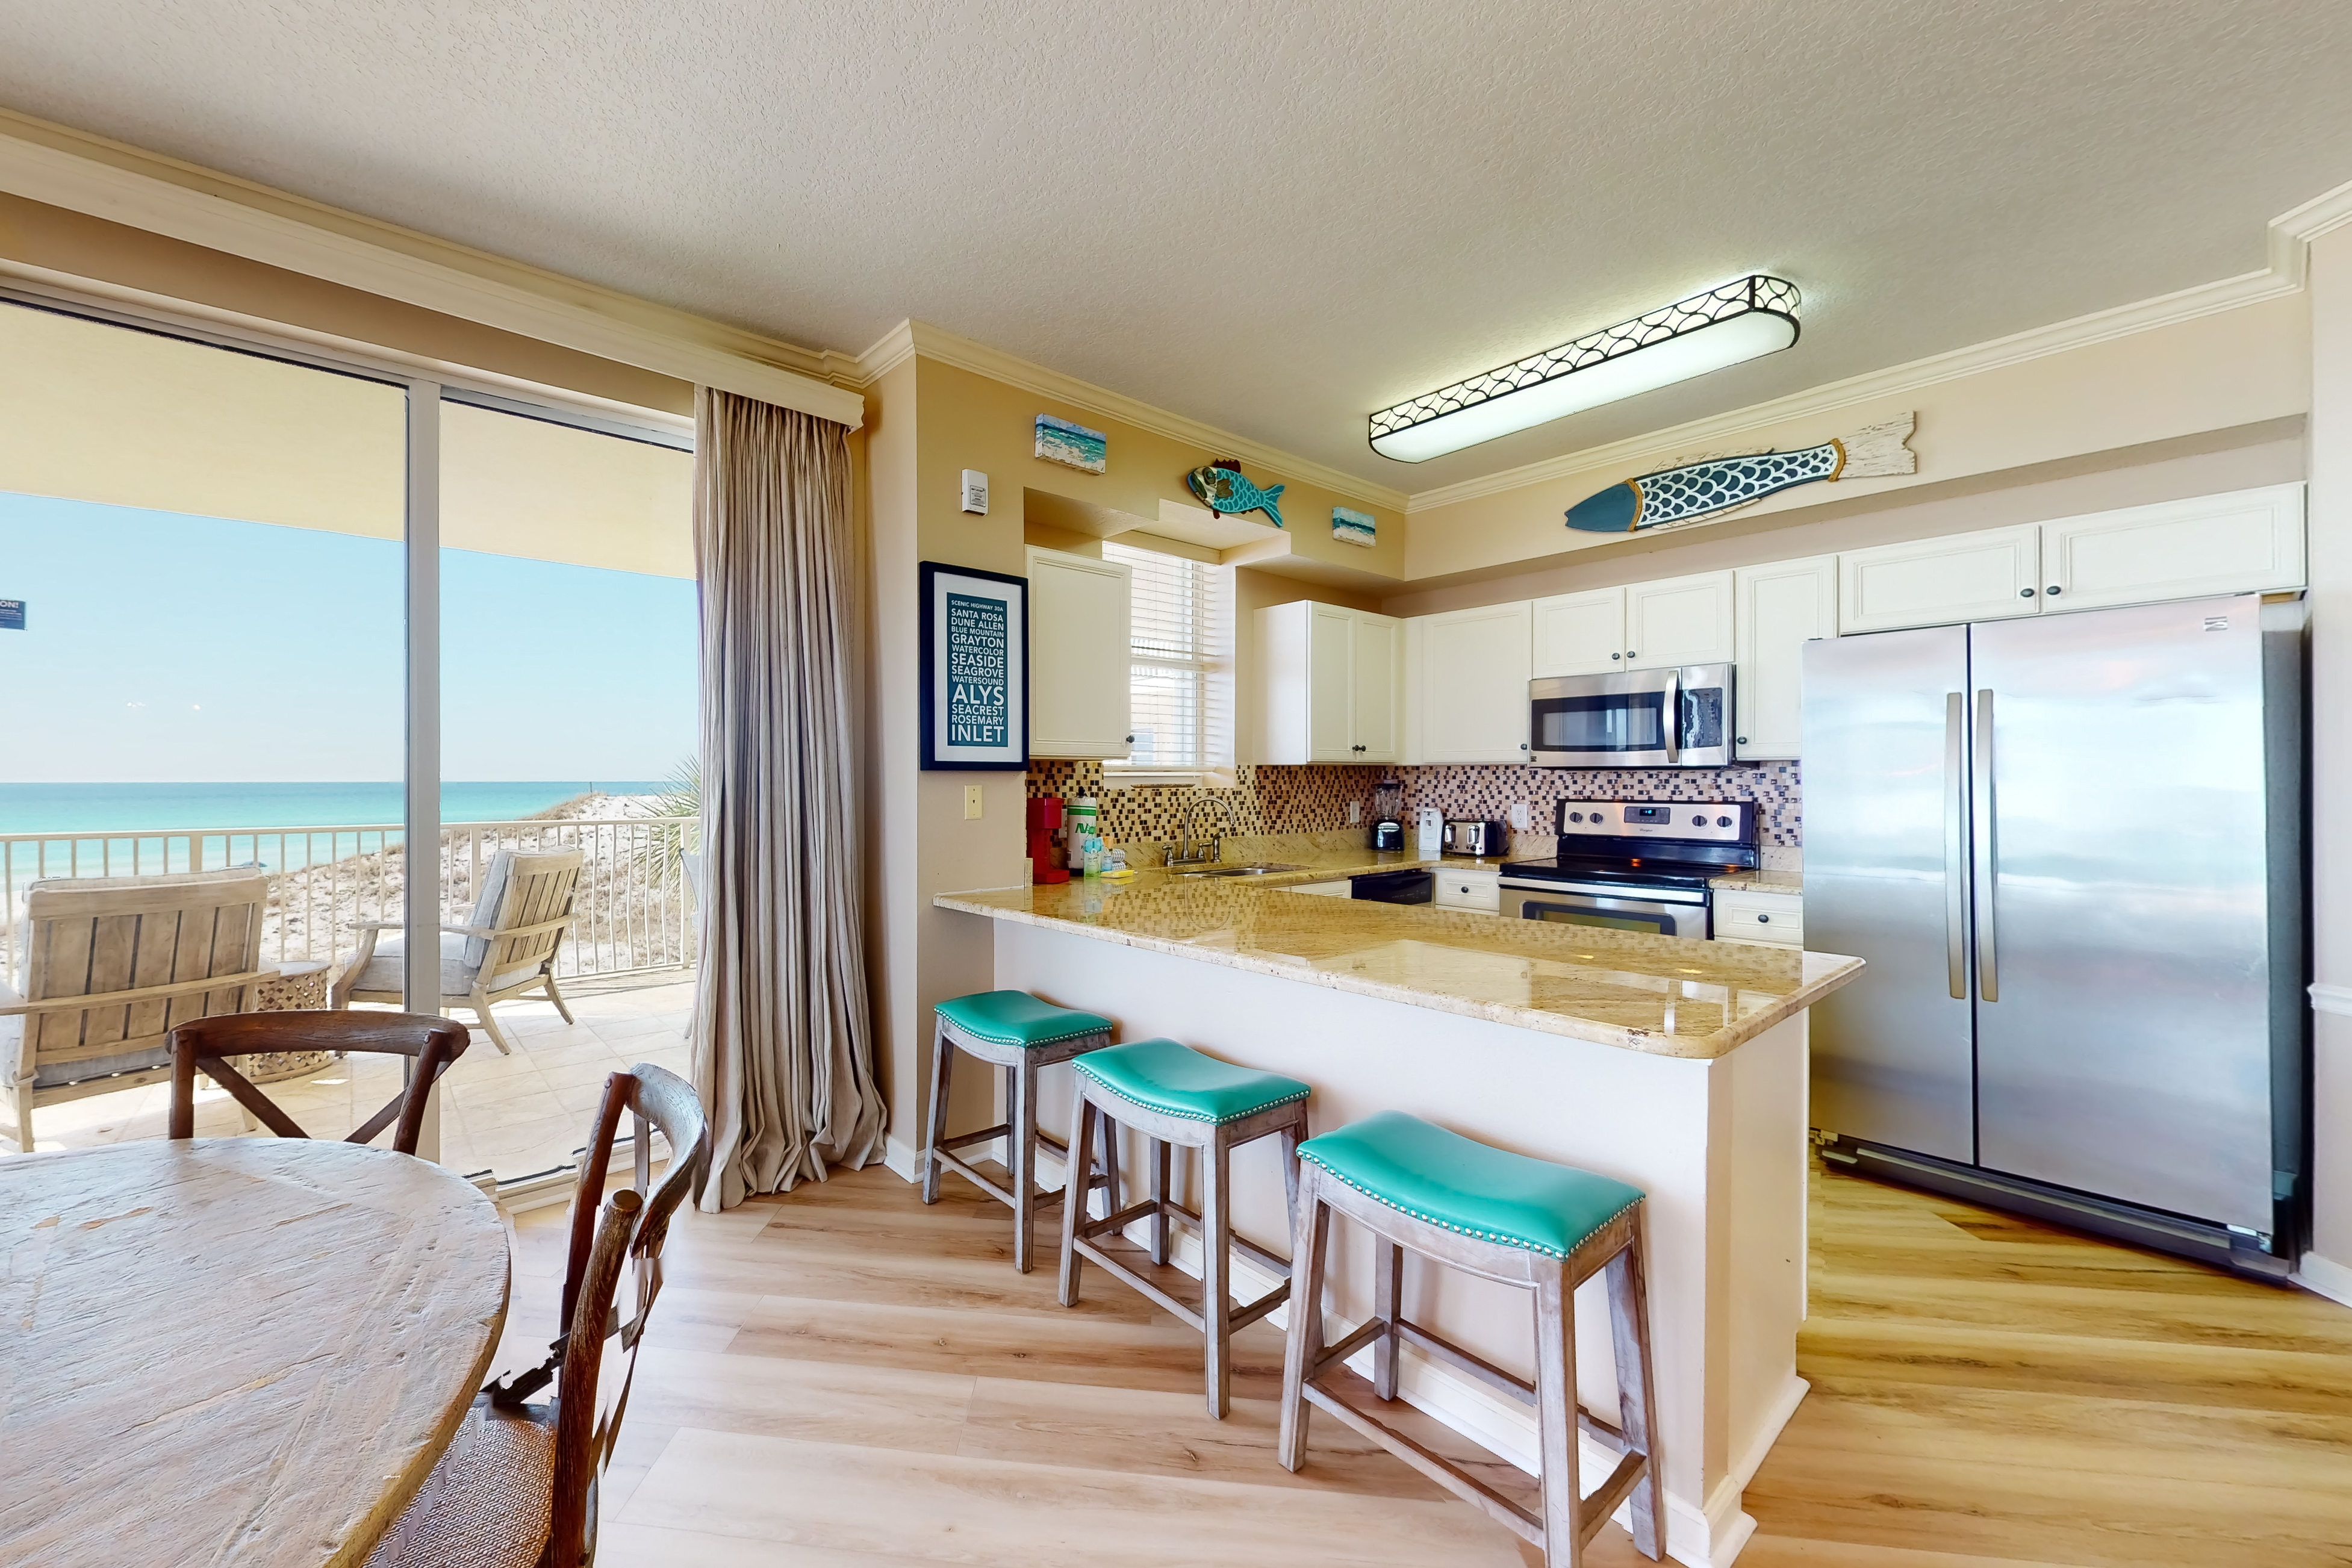 Dunes of Seagrove A209 Condo rental in Dunes of Seagrove in Highway 30-A Florida - #7